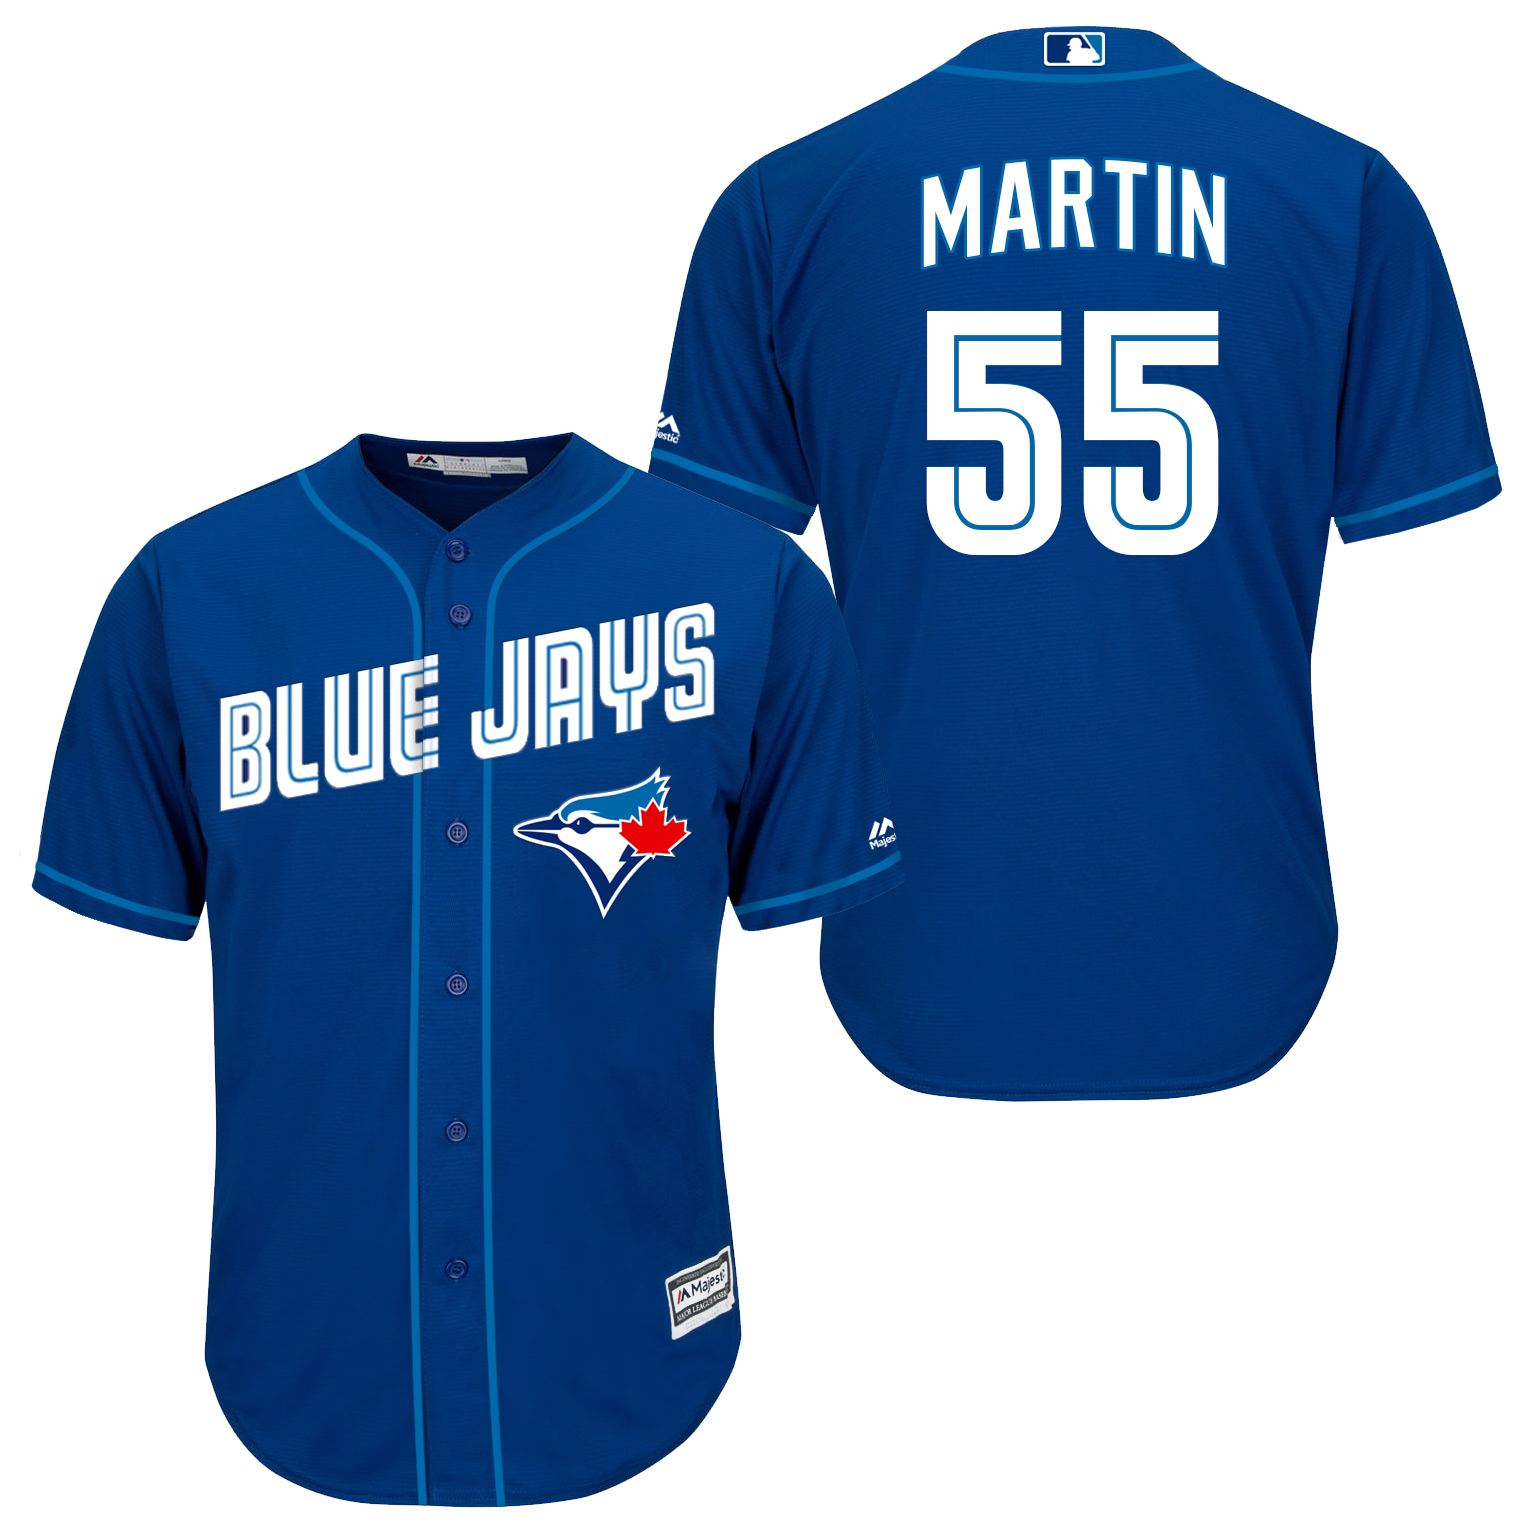 Blue Jays 55 Russell Martin Royal Blue New Cool Base Jersey